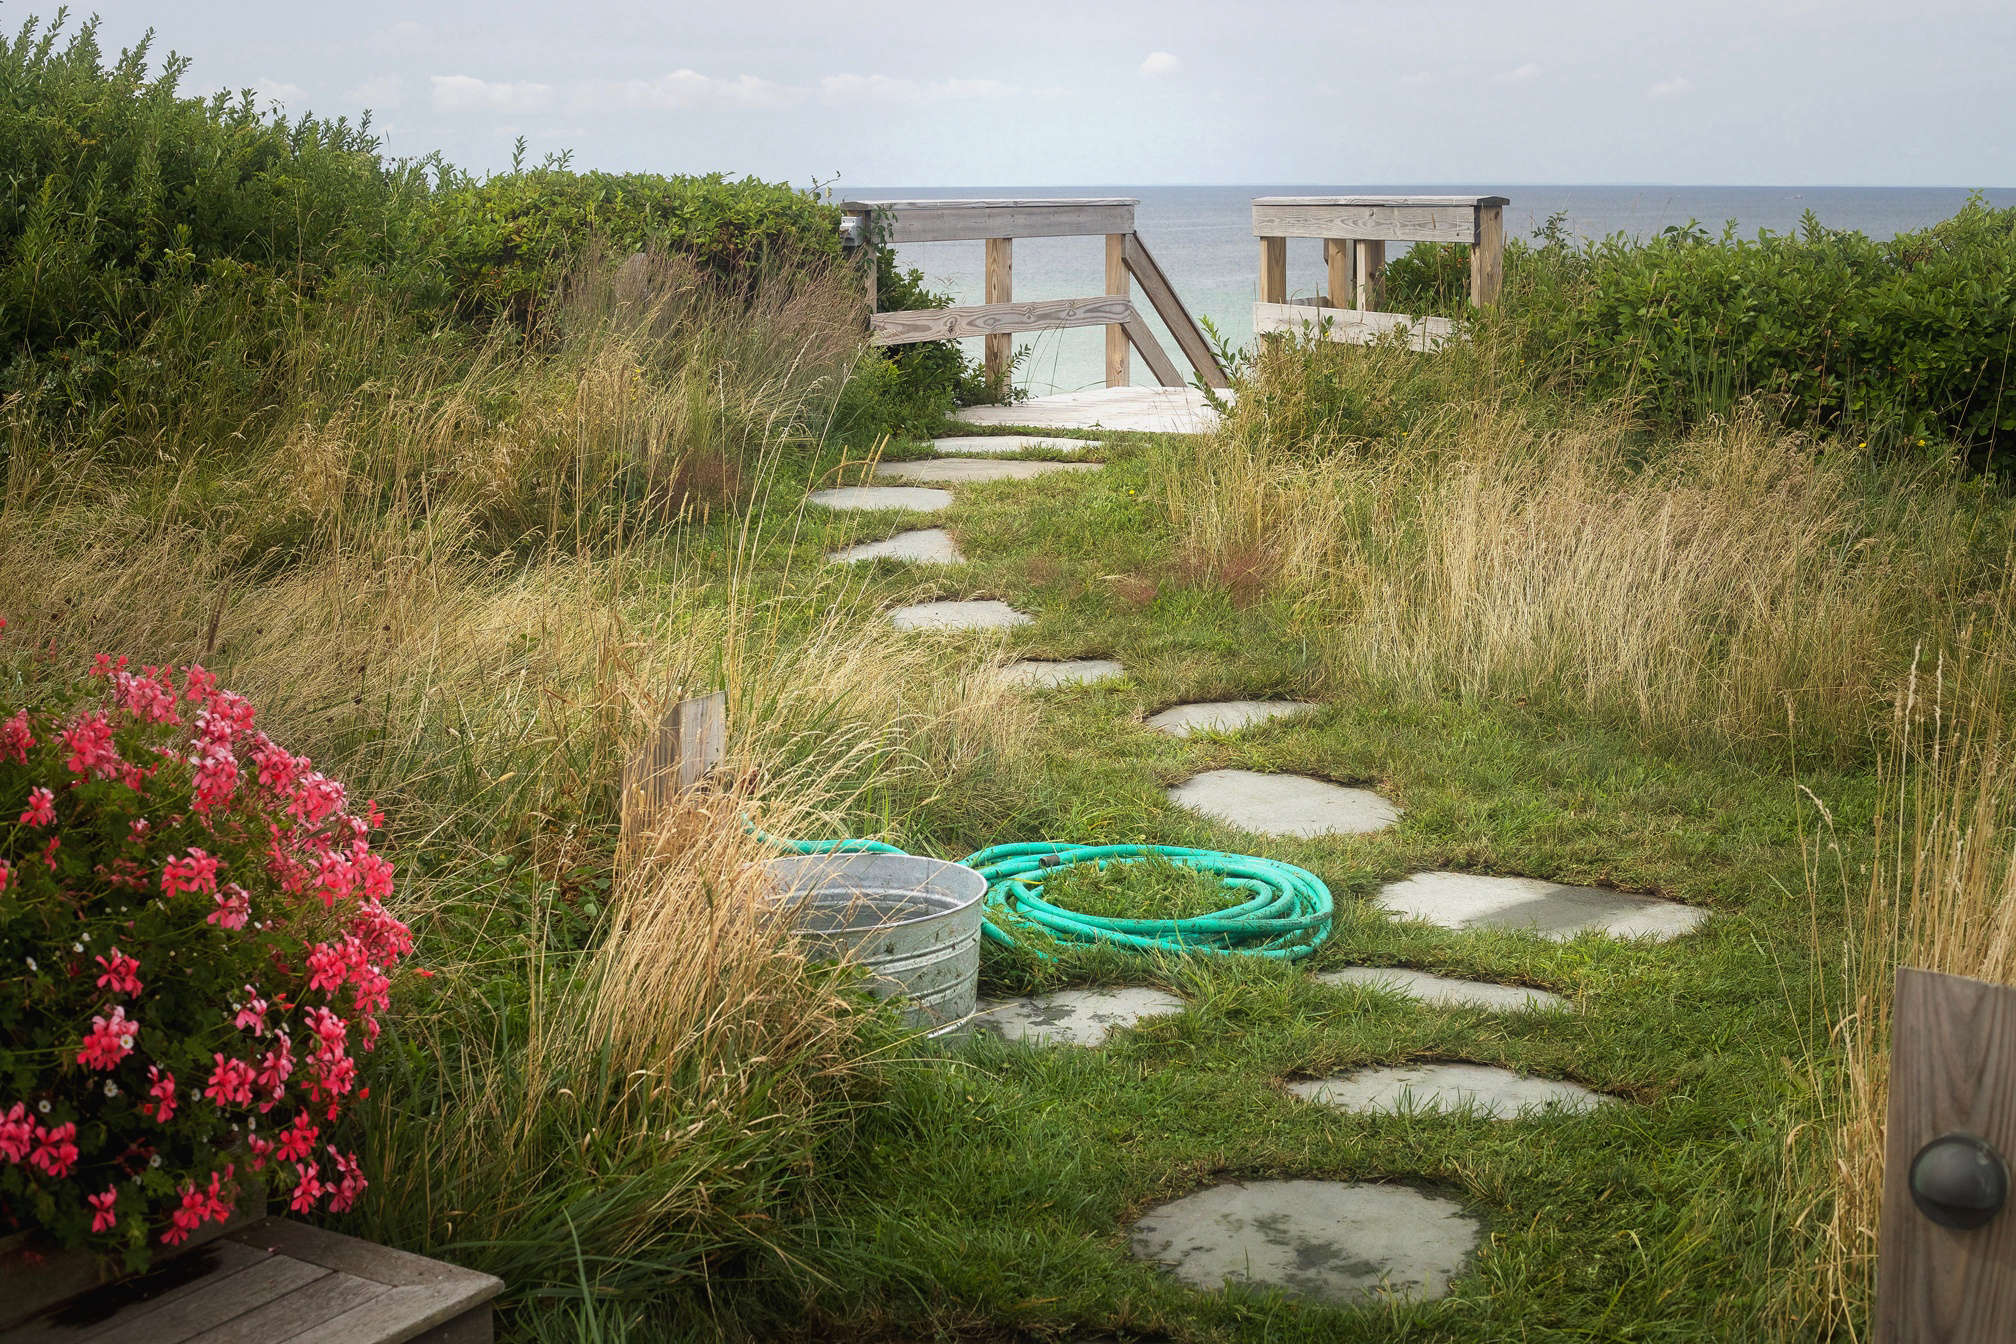 The Sand-Free Cottage: 8 Ways to Keep the Beach at Bay - Remodelista